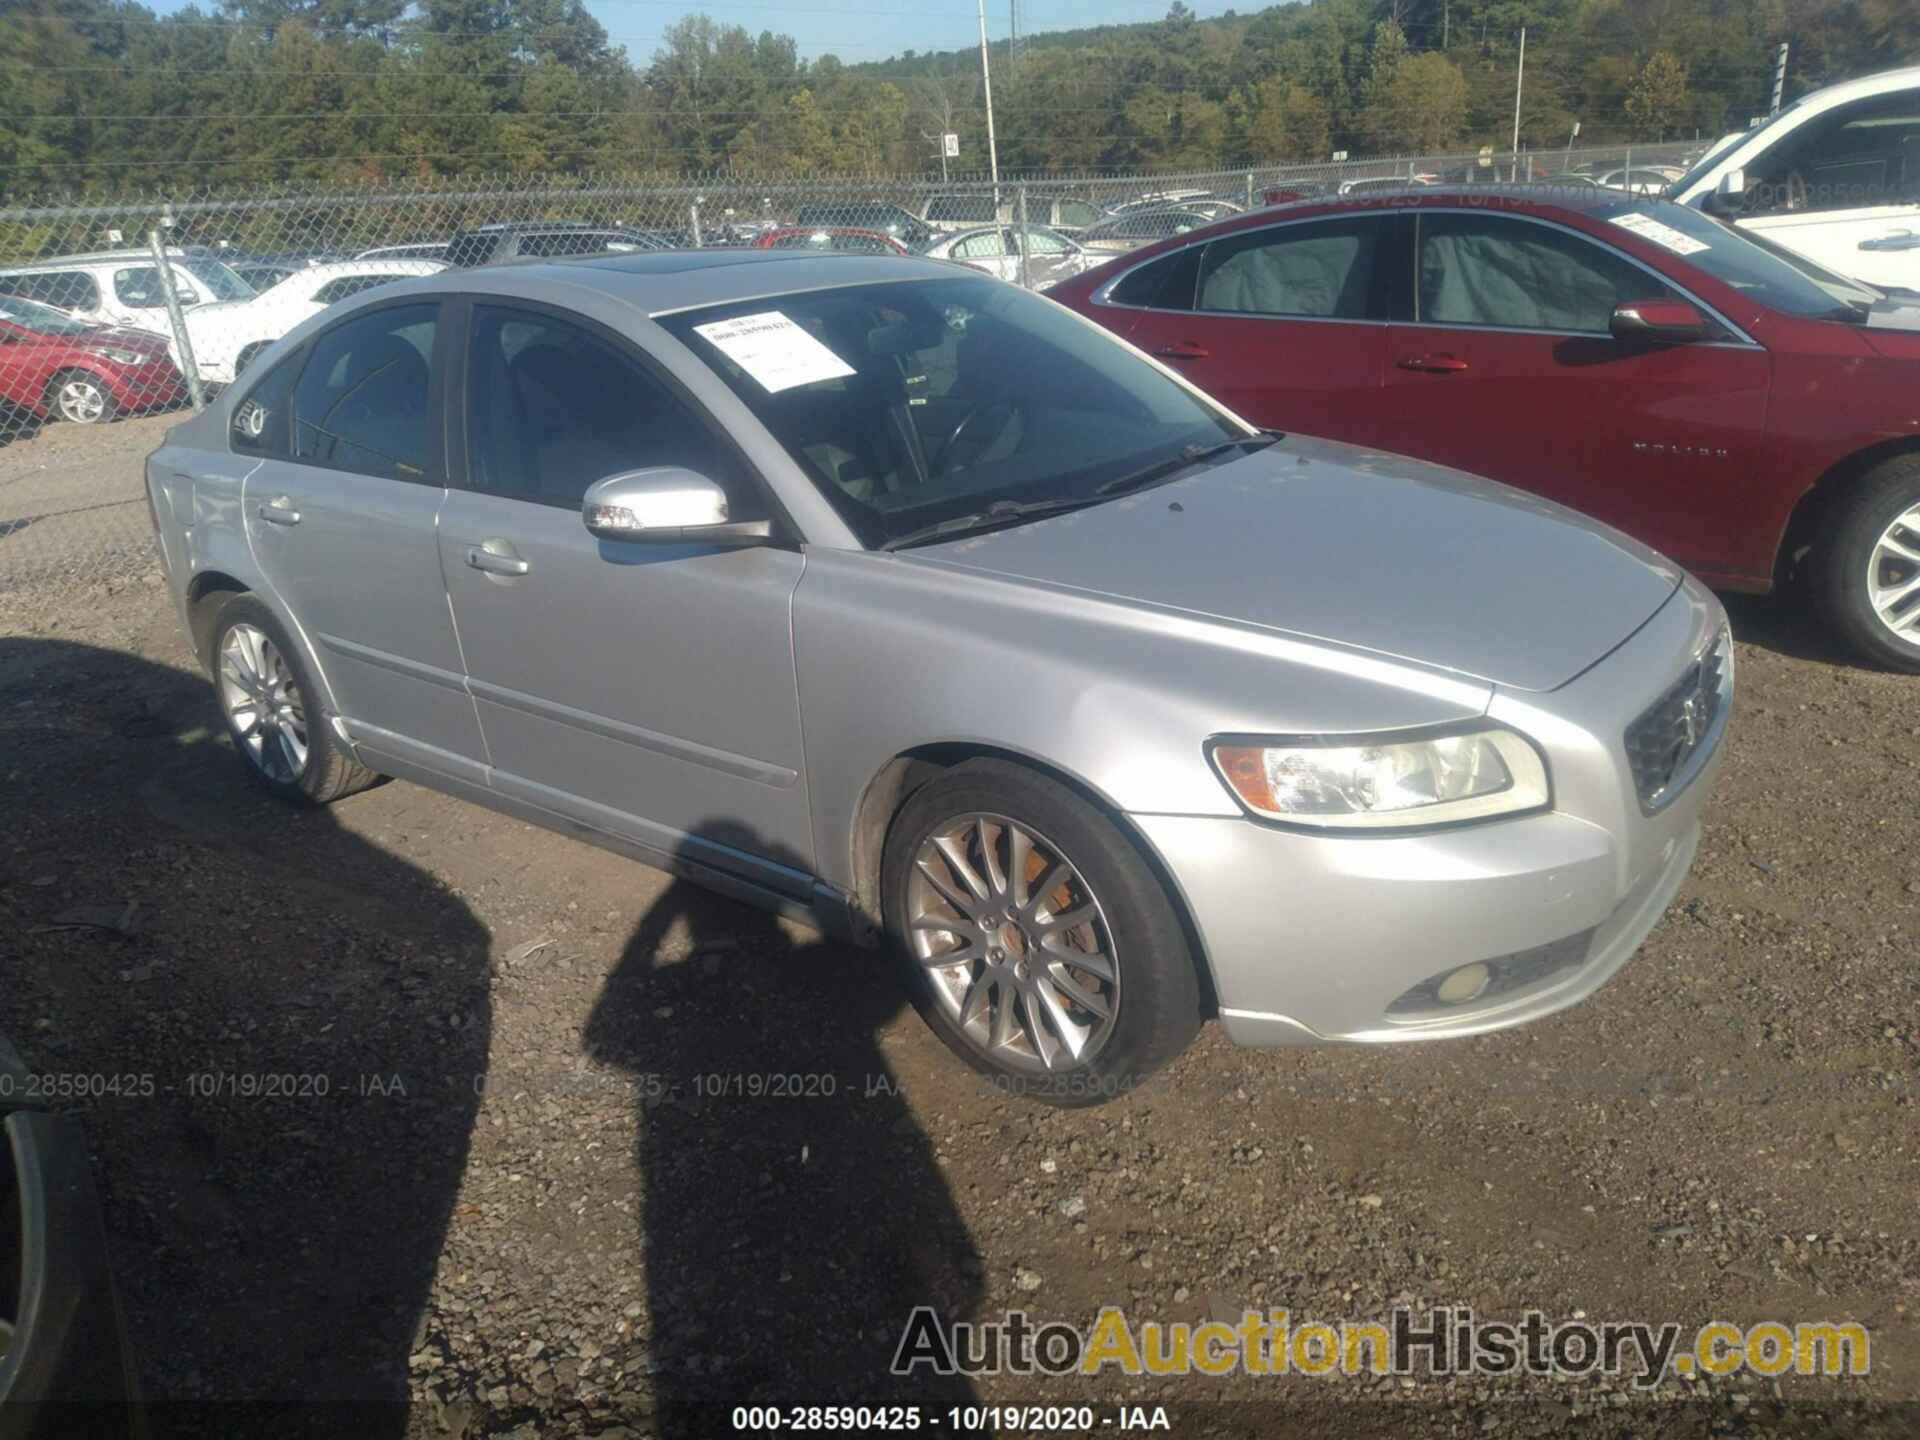 VOLVO S40, YV1382MS5A2489749